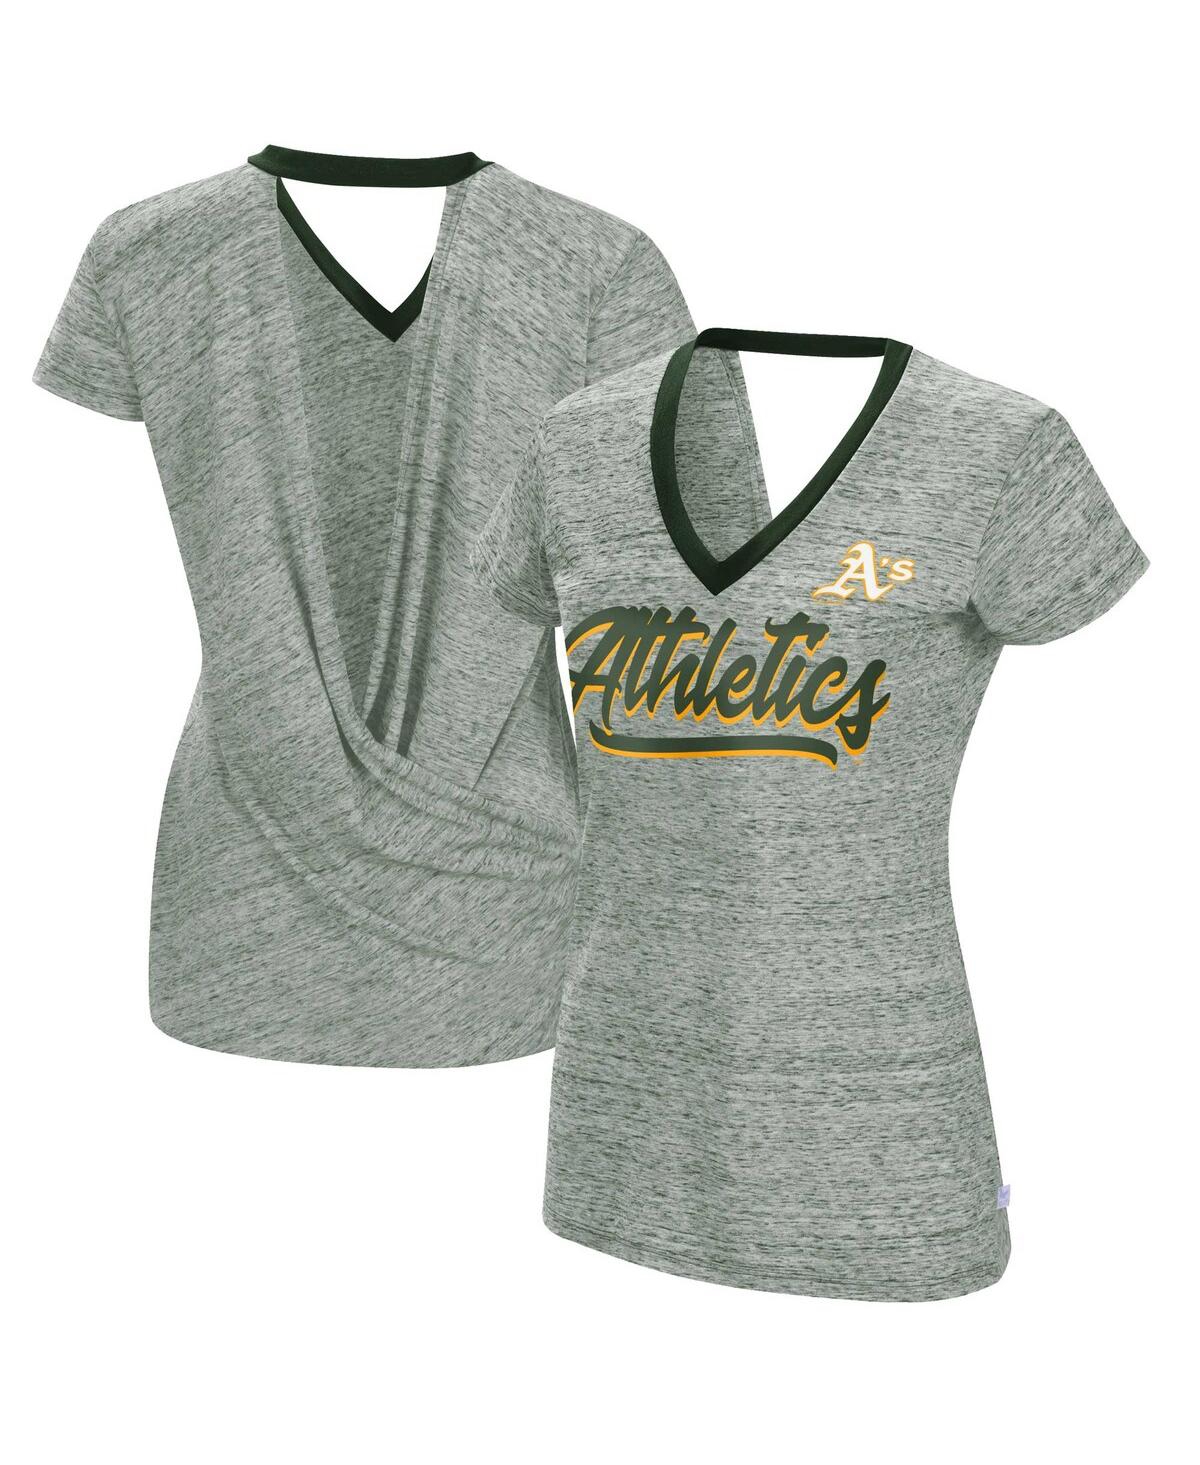 Women's Touch Green Oakland Athletics Halftime Back Wrap Top V-Neck T-shirt - Green